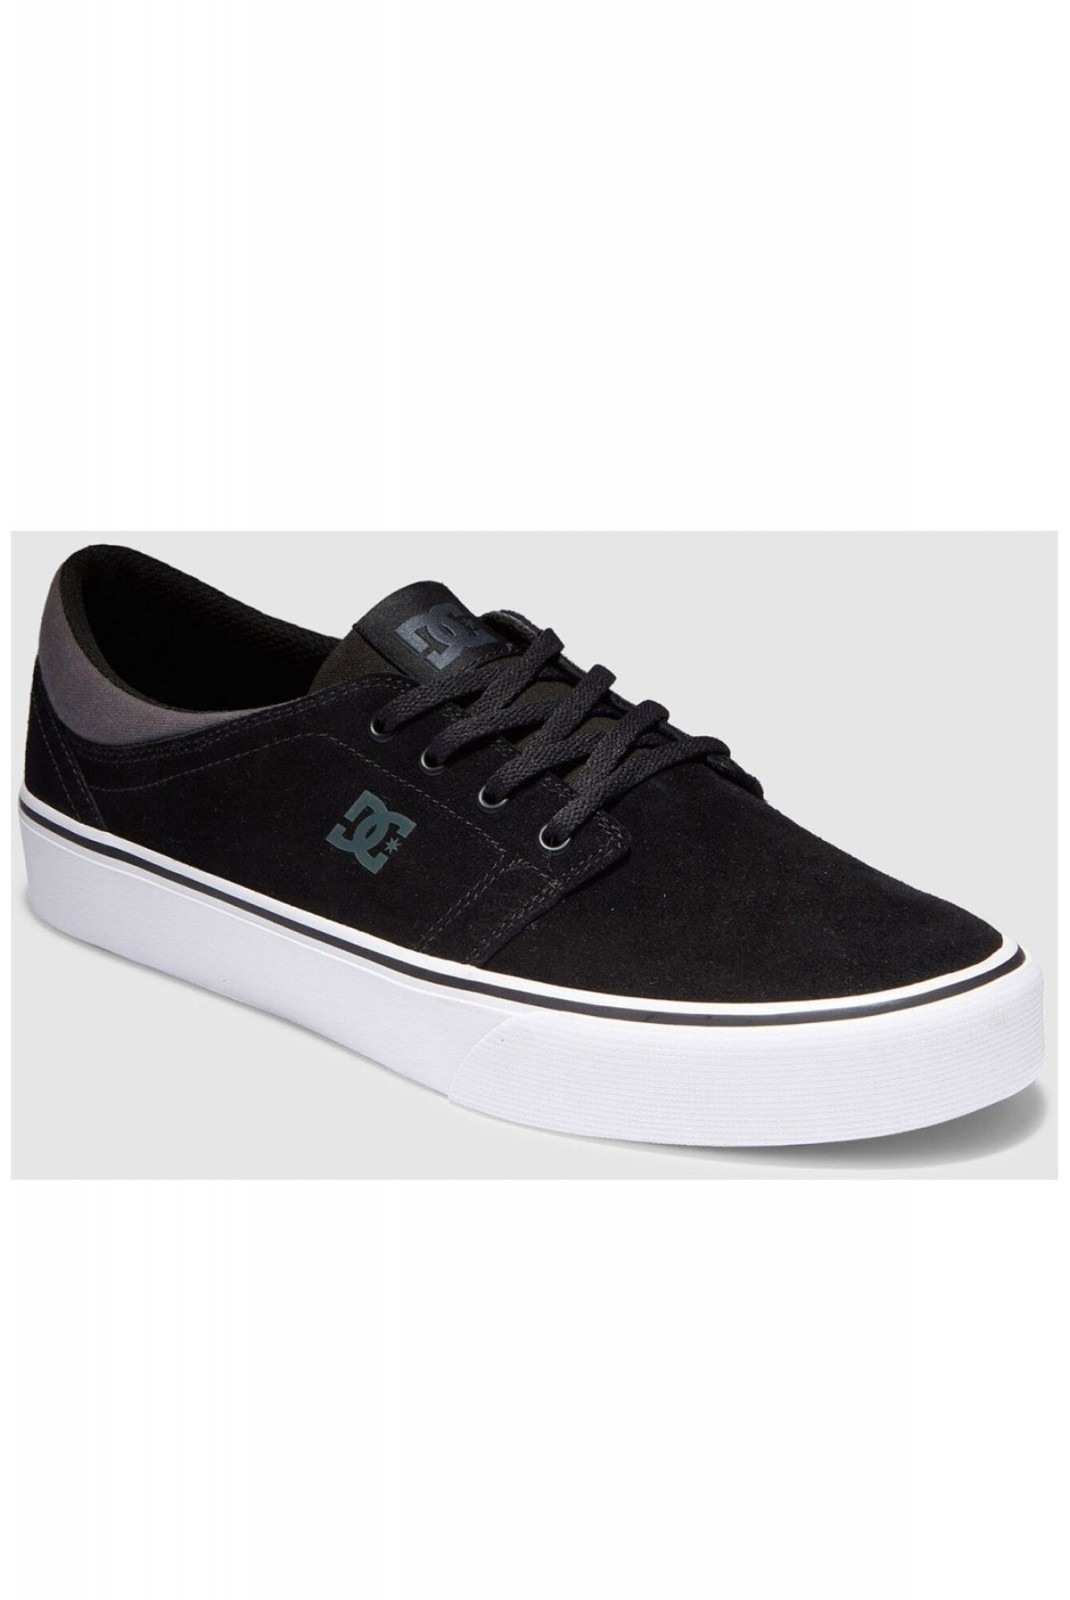 Sneakers basses suède Trase SD Dc shoes XKKS ADYS300652